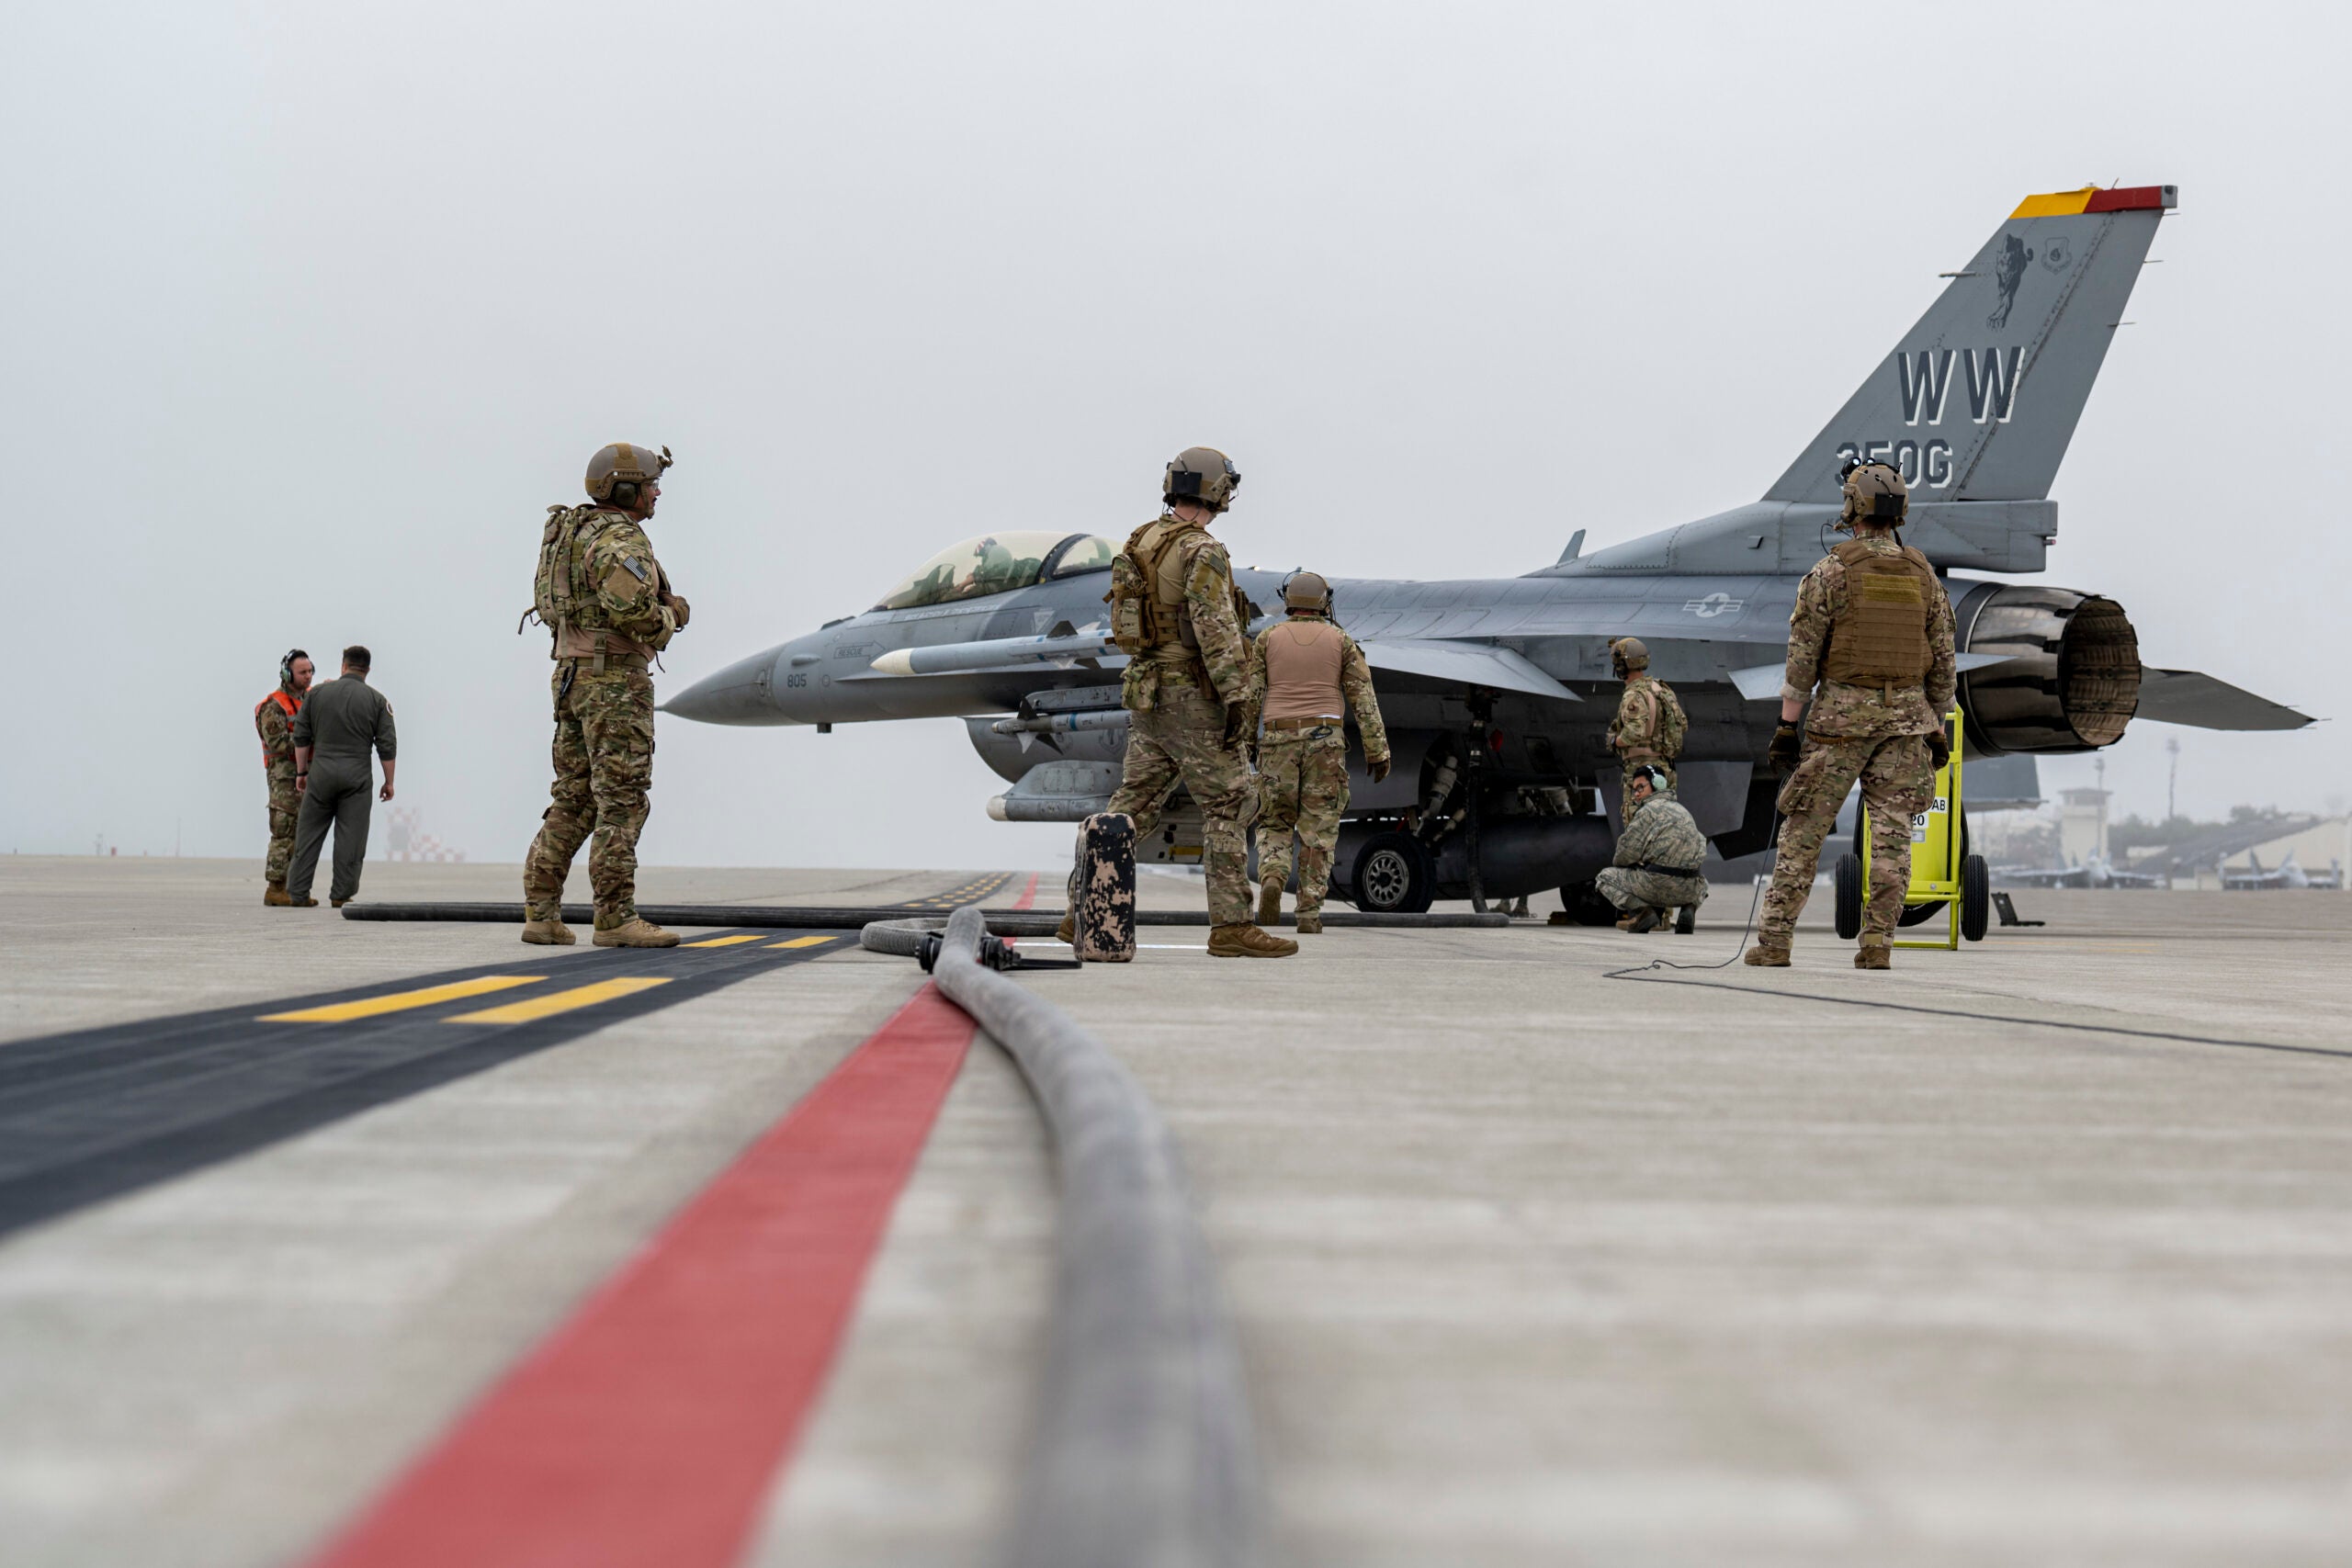 U.S. Airmen from the 18th Logistic Readiness Squadron and 1st Special Operations Squadron from Kadena Air Base, Japan, refuel an F-16 Fighting Falcon during a forward area refueling point training at Misawa Air Base, Japan, June 25, 2020. When a fighter squadron has FARP support, options are vastly increased, as any accessible airfield or island can be used to replenish fighters and send them back to the fight. (U.S. Air Force photo by Staff Sgt. Melanie A. Bulow-Gonterman)